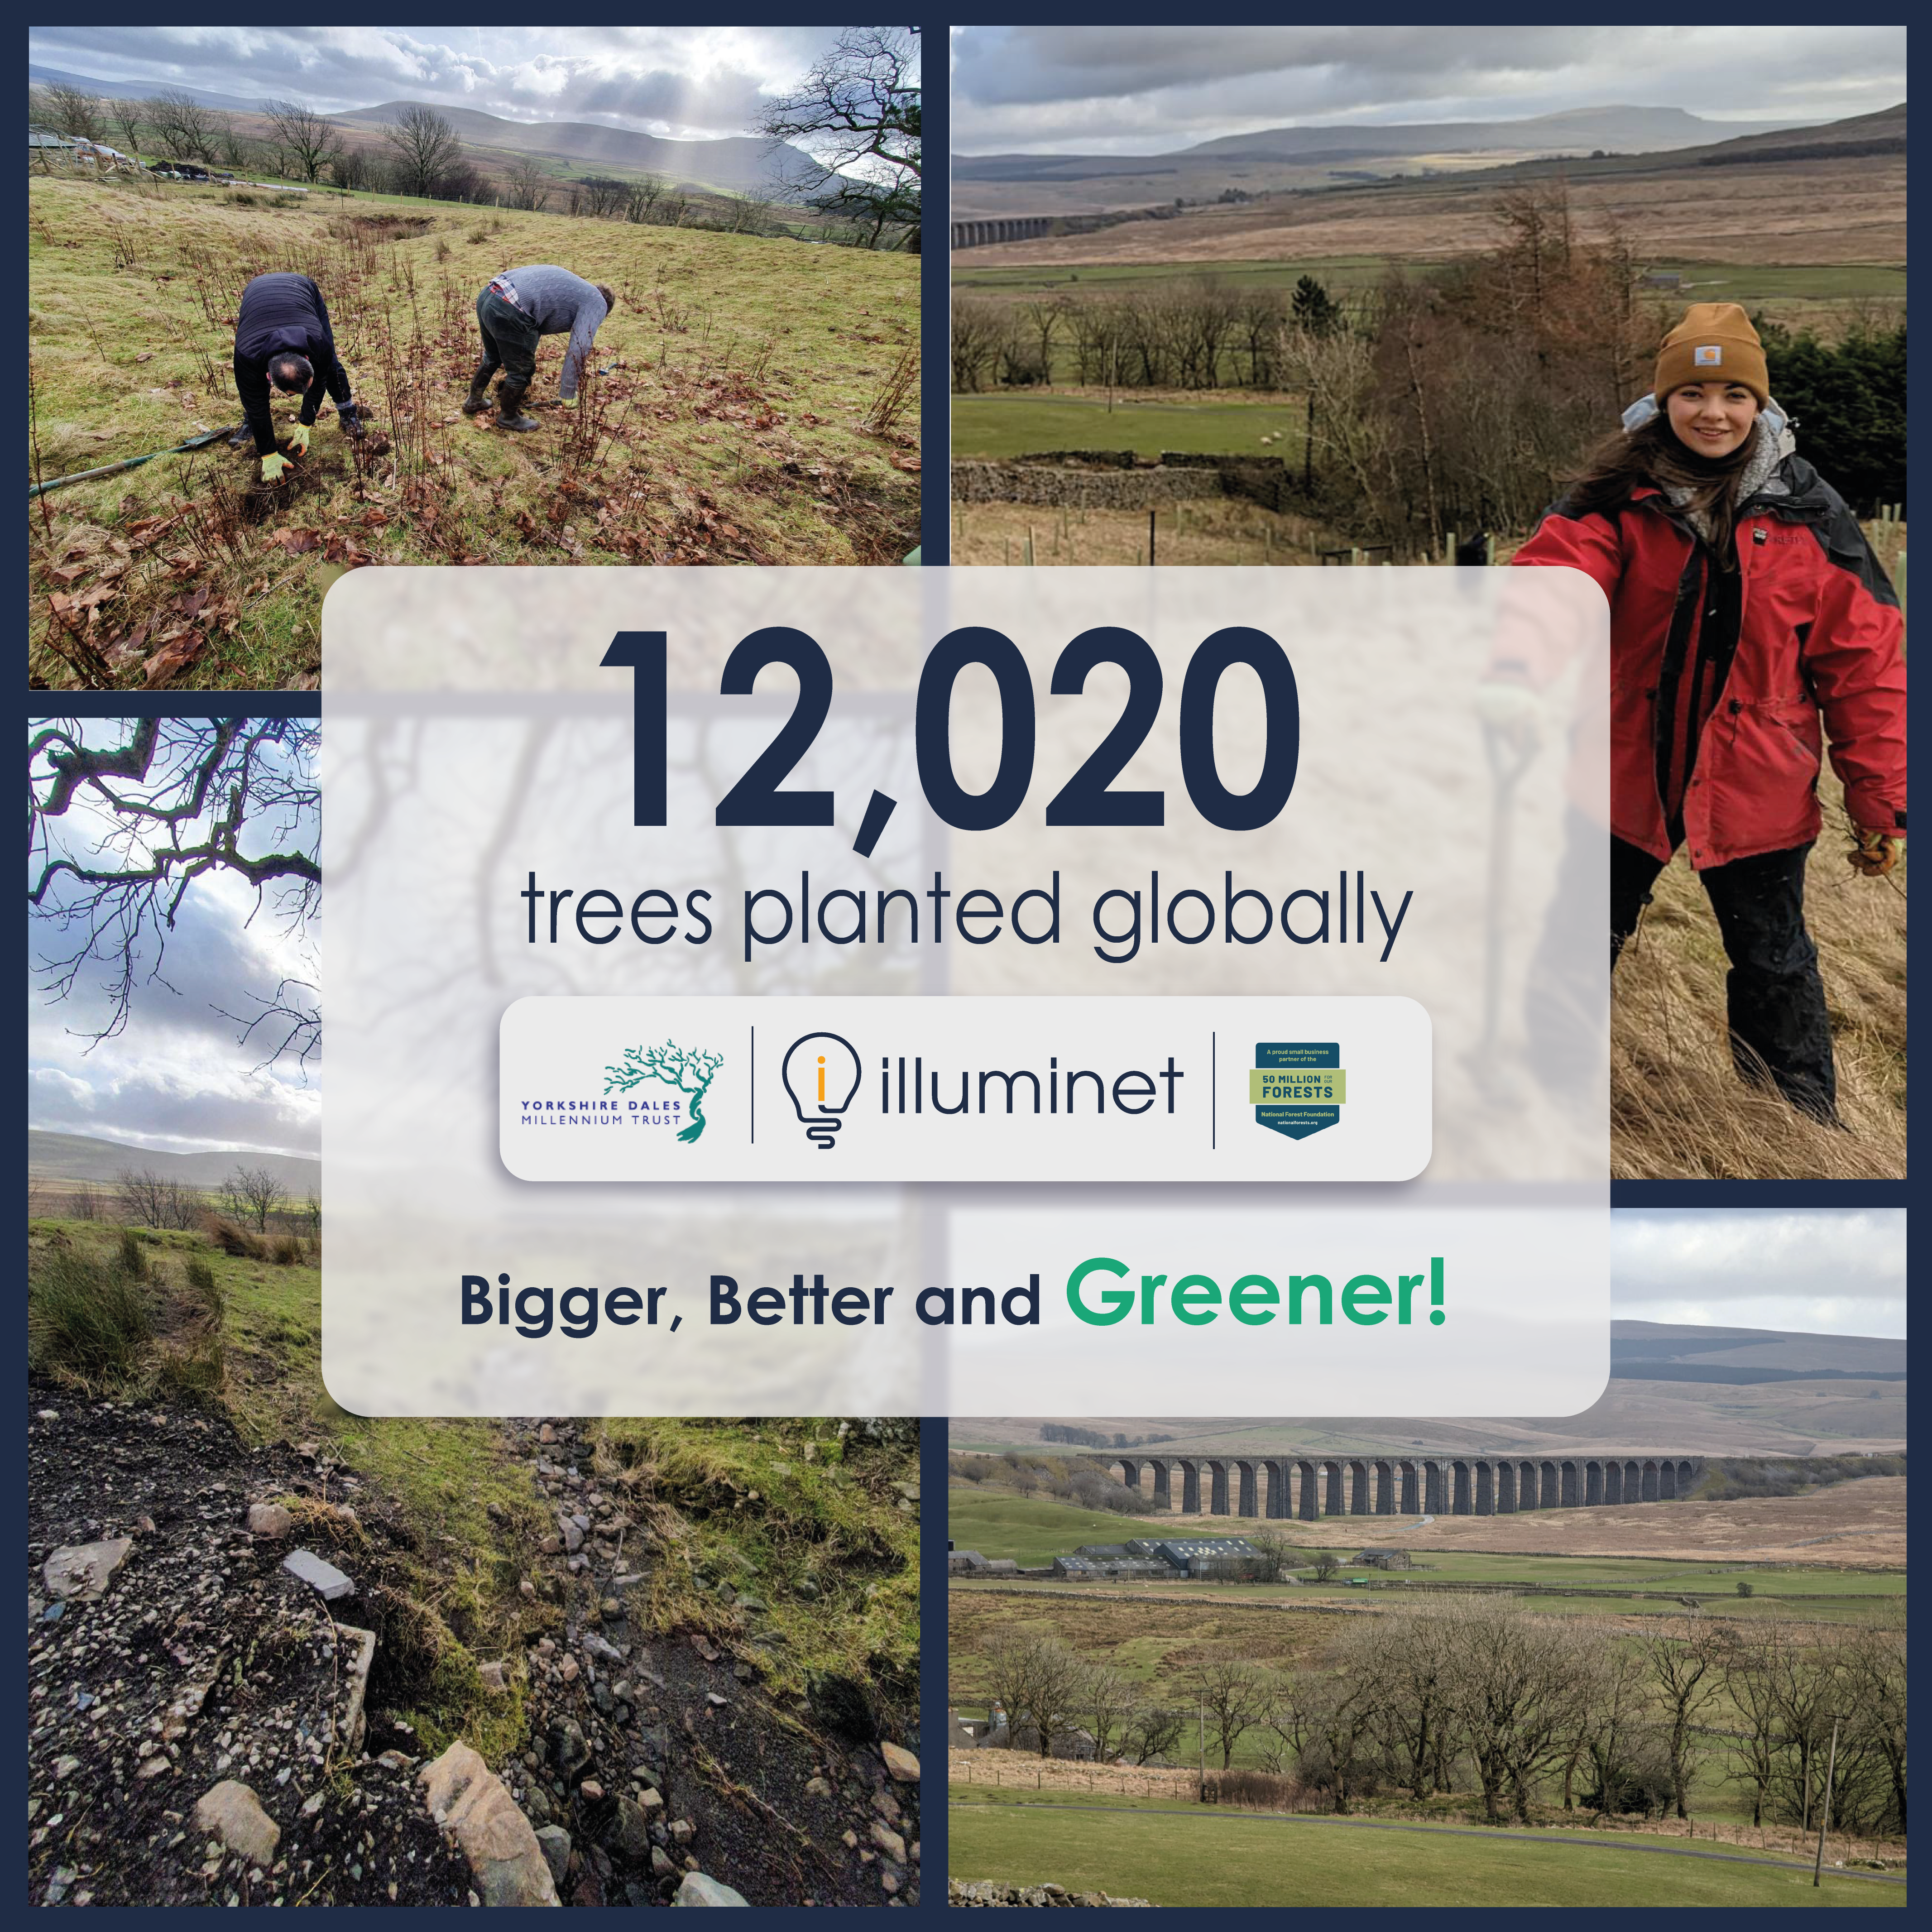 12,020 tree planted globally! We are not stopping there!